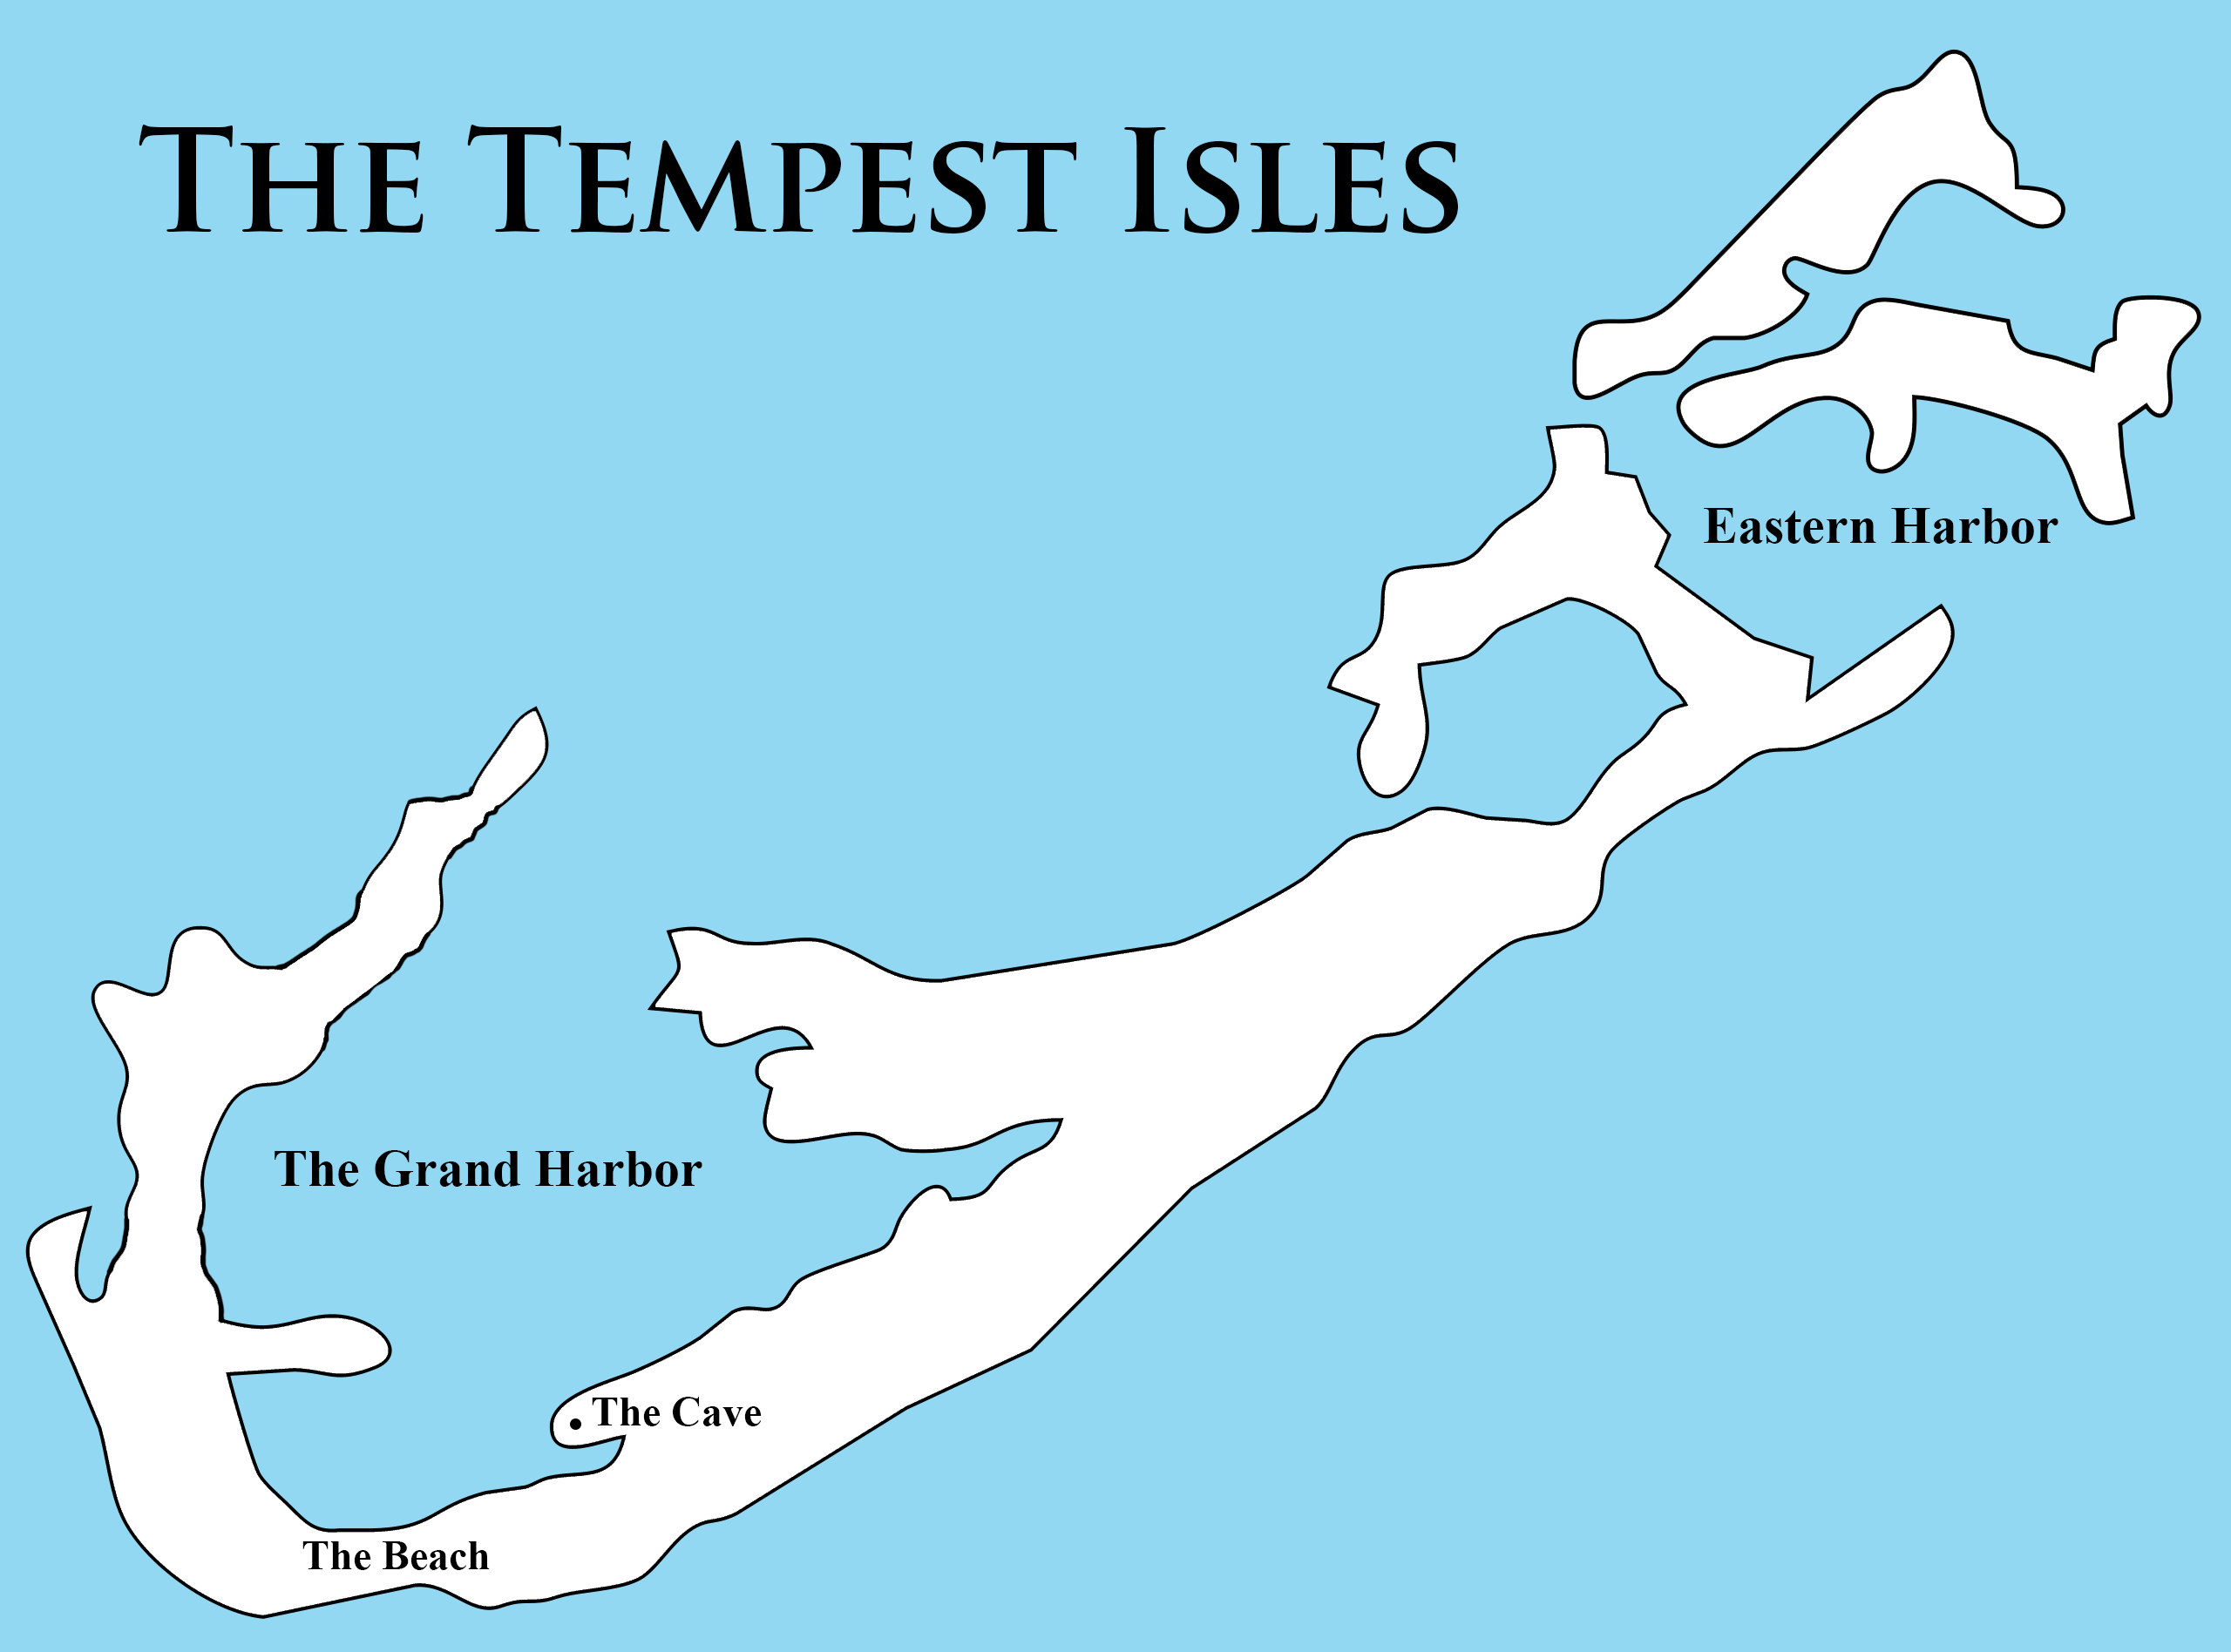 The Tempest Isles